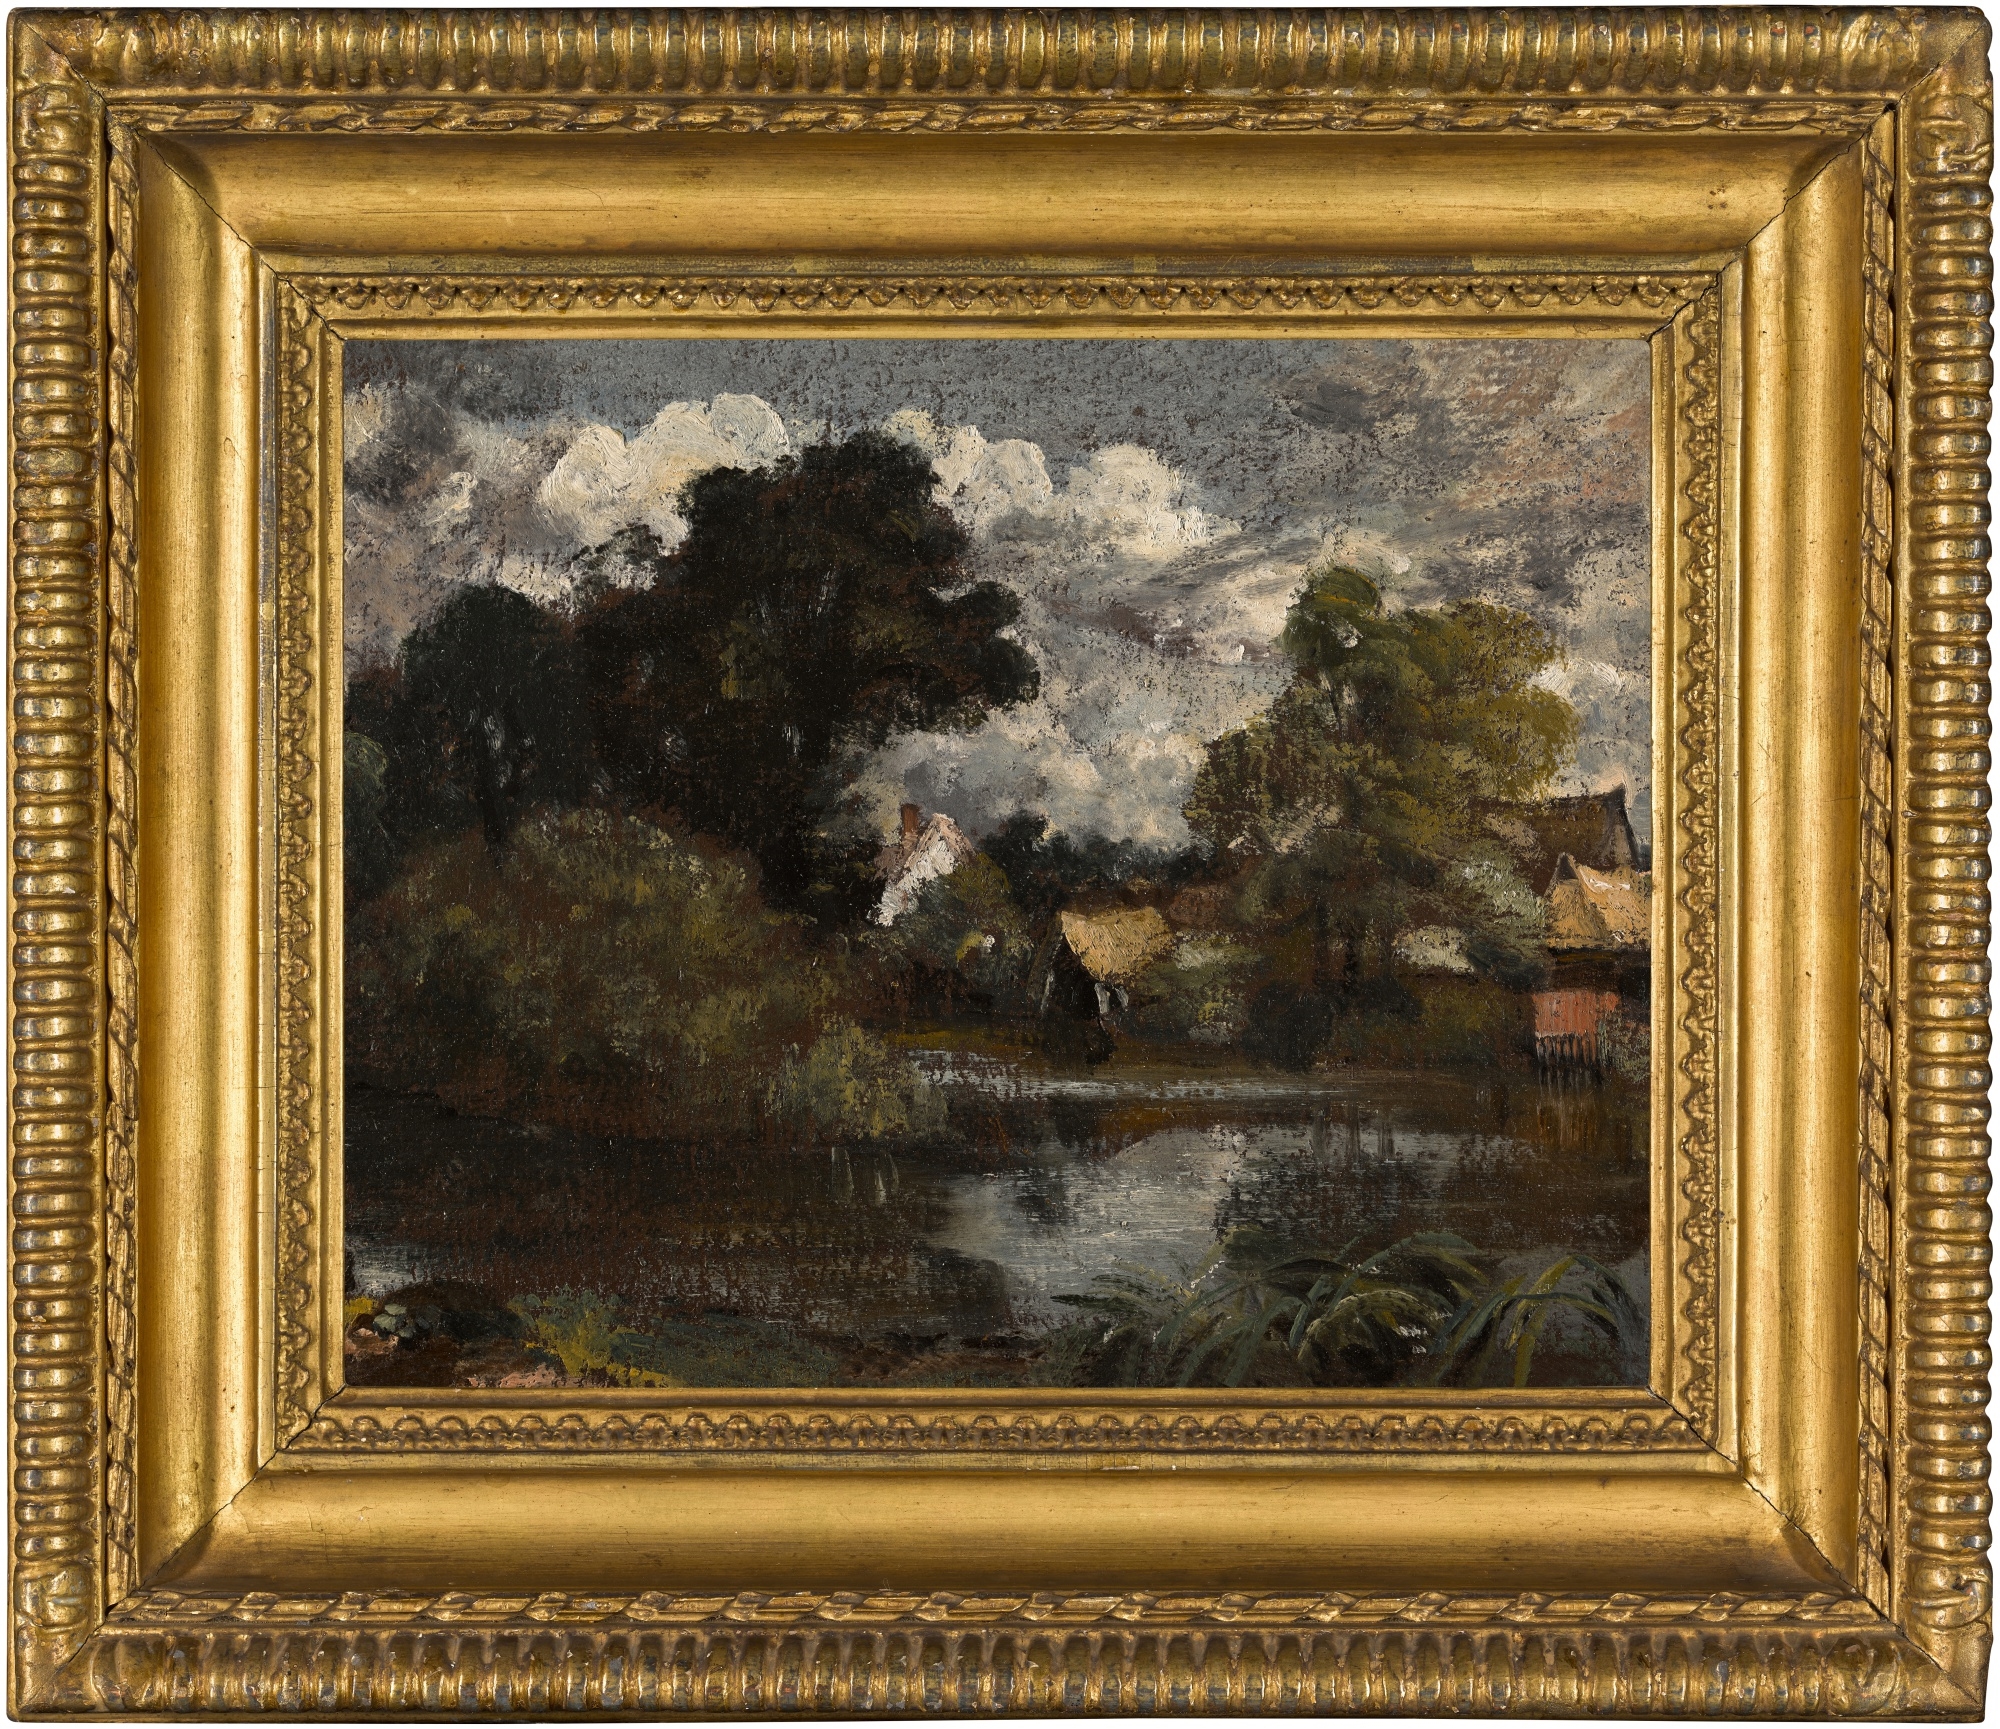 Artwork by John Constable, Study for the White Horse, Made of oil on board